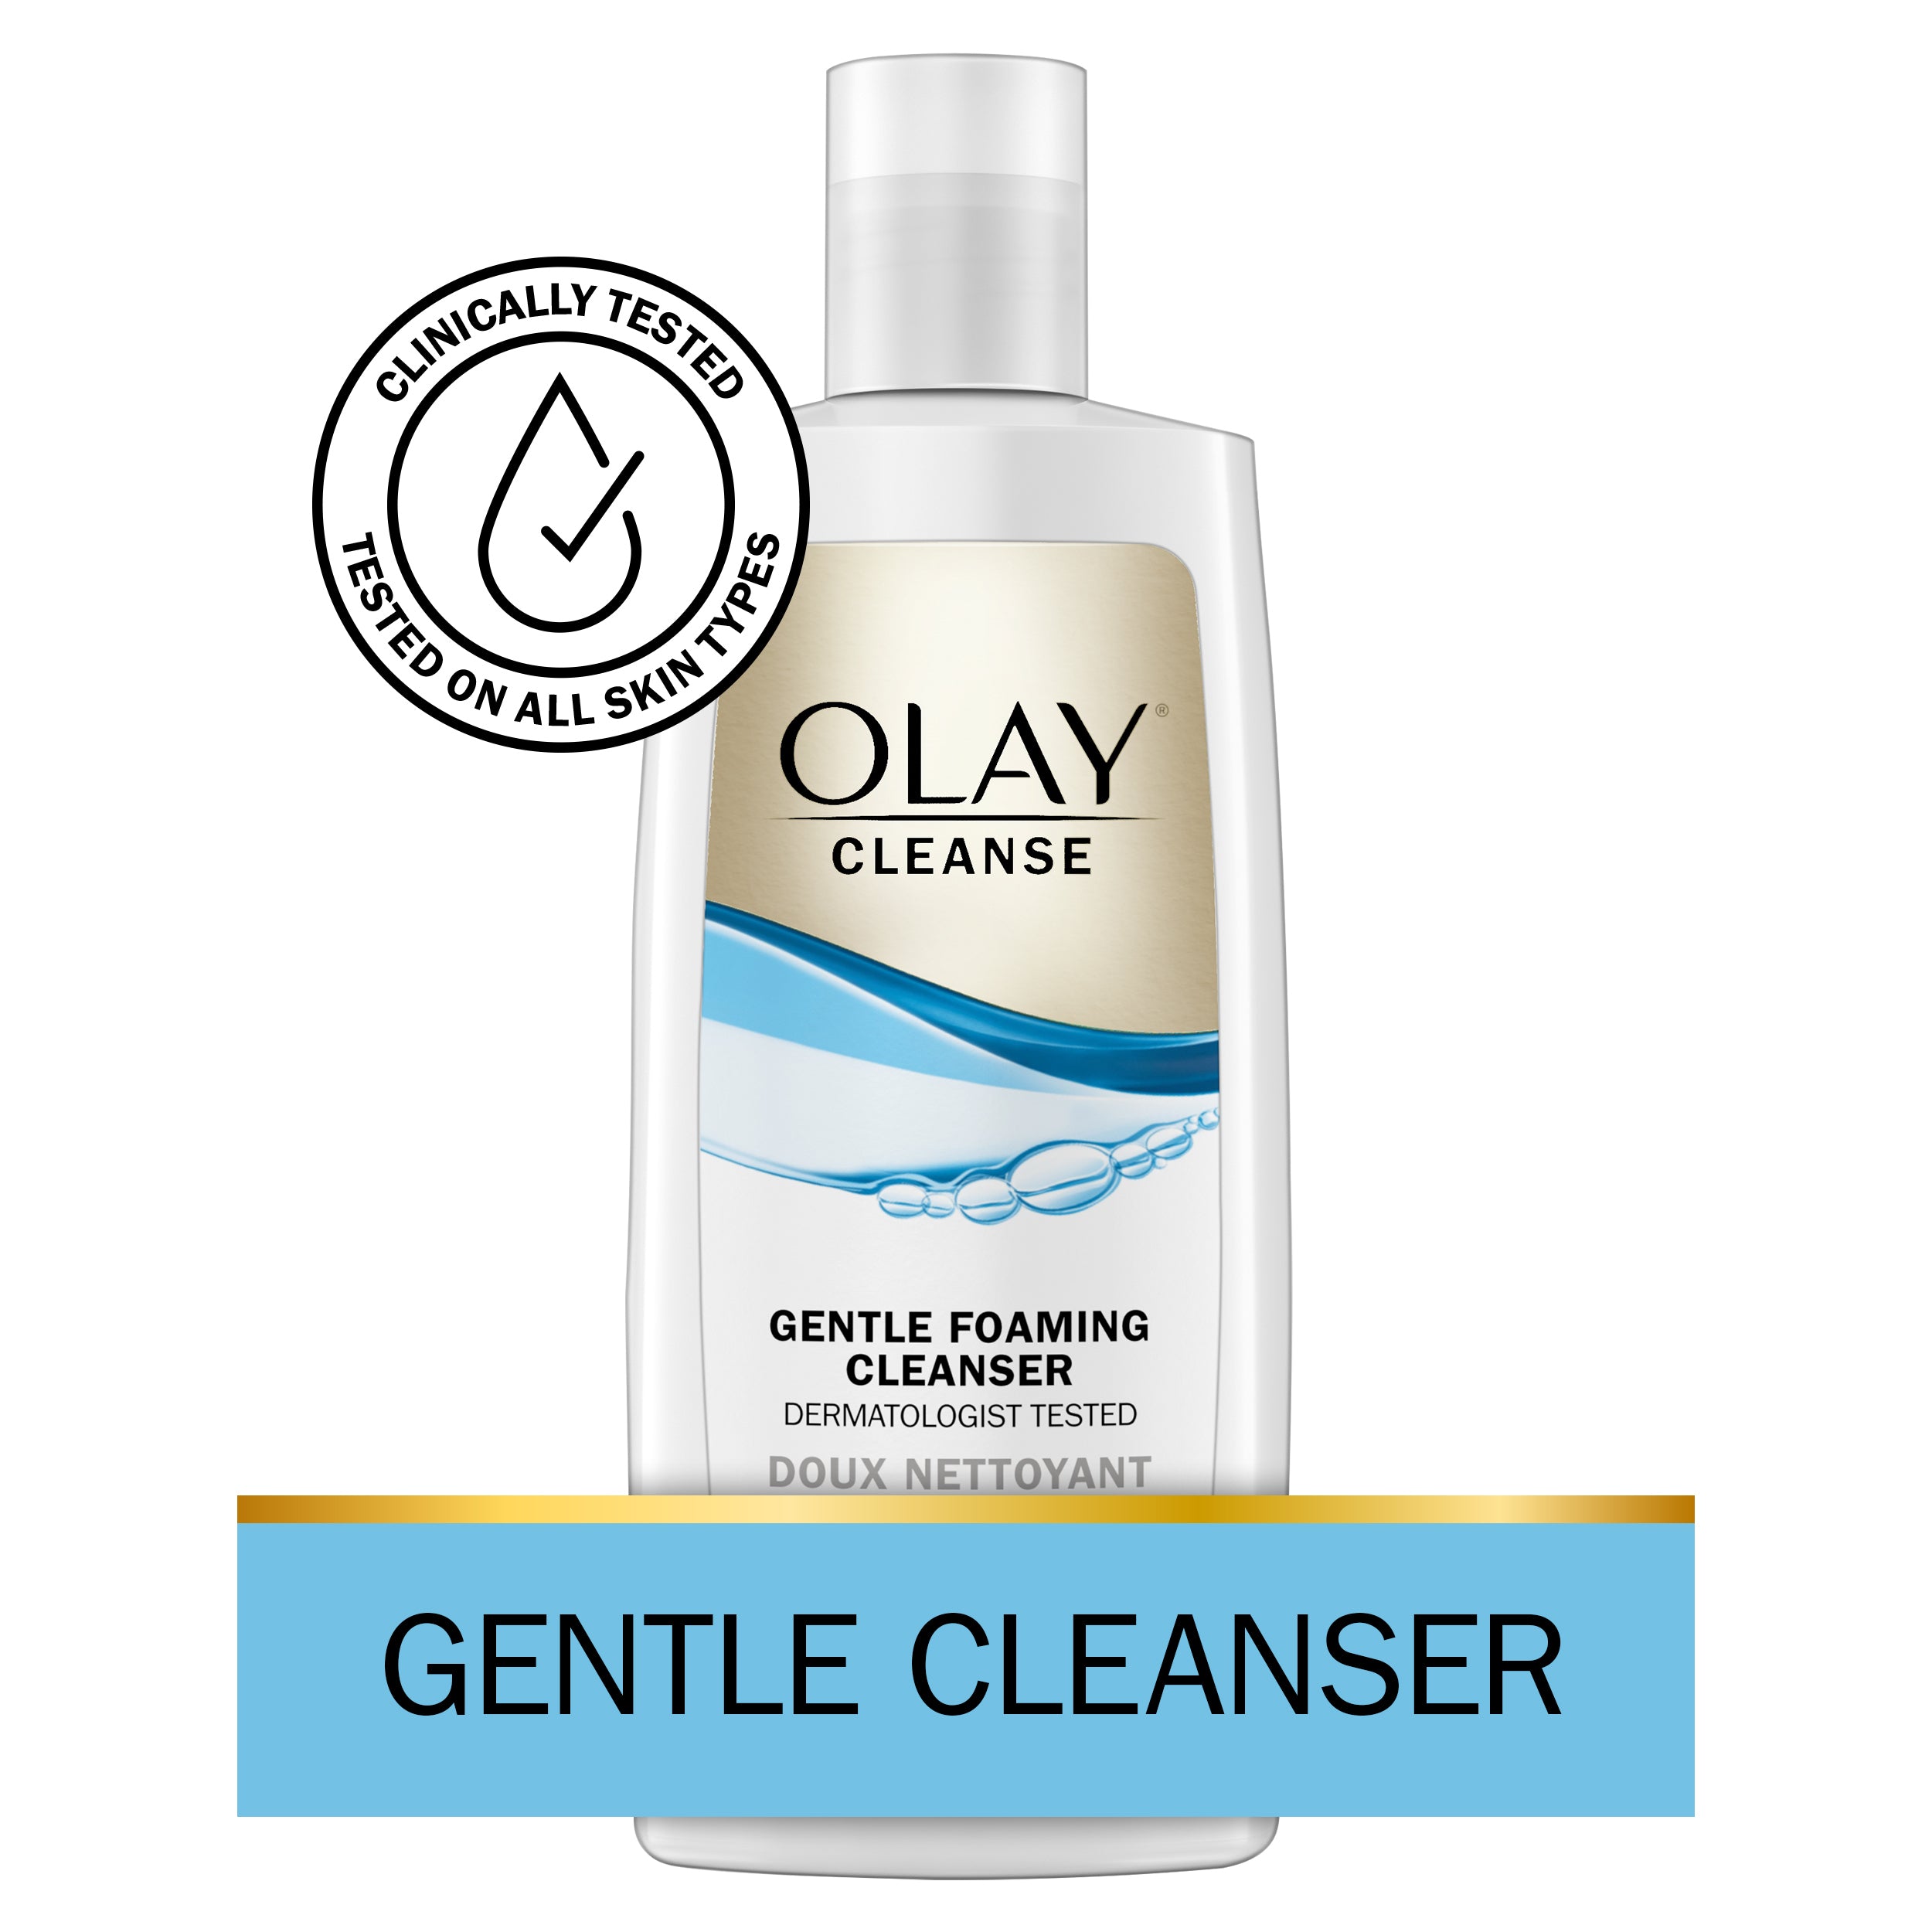 Olay Cleanse Gentle Foaming Face Cleanser, All Skin Types 6.7 fl oz | MTTS321